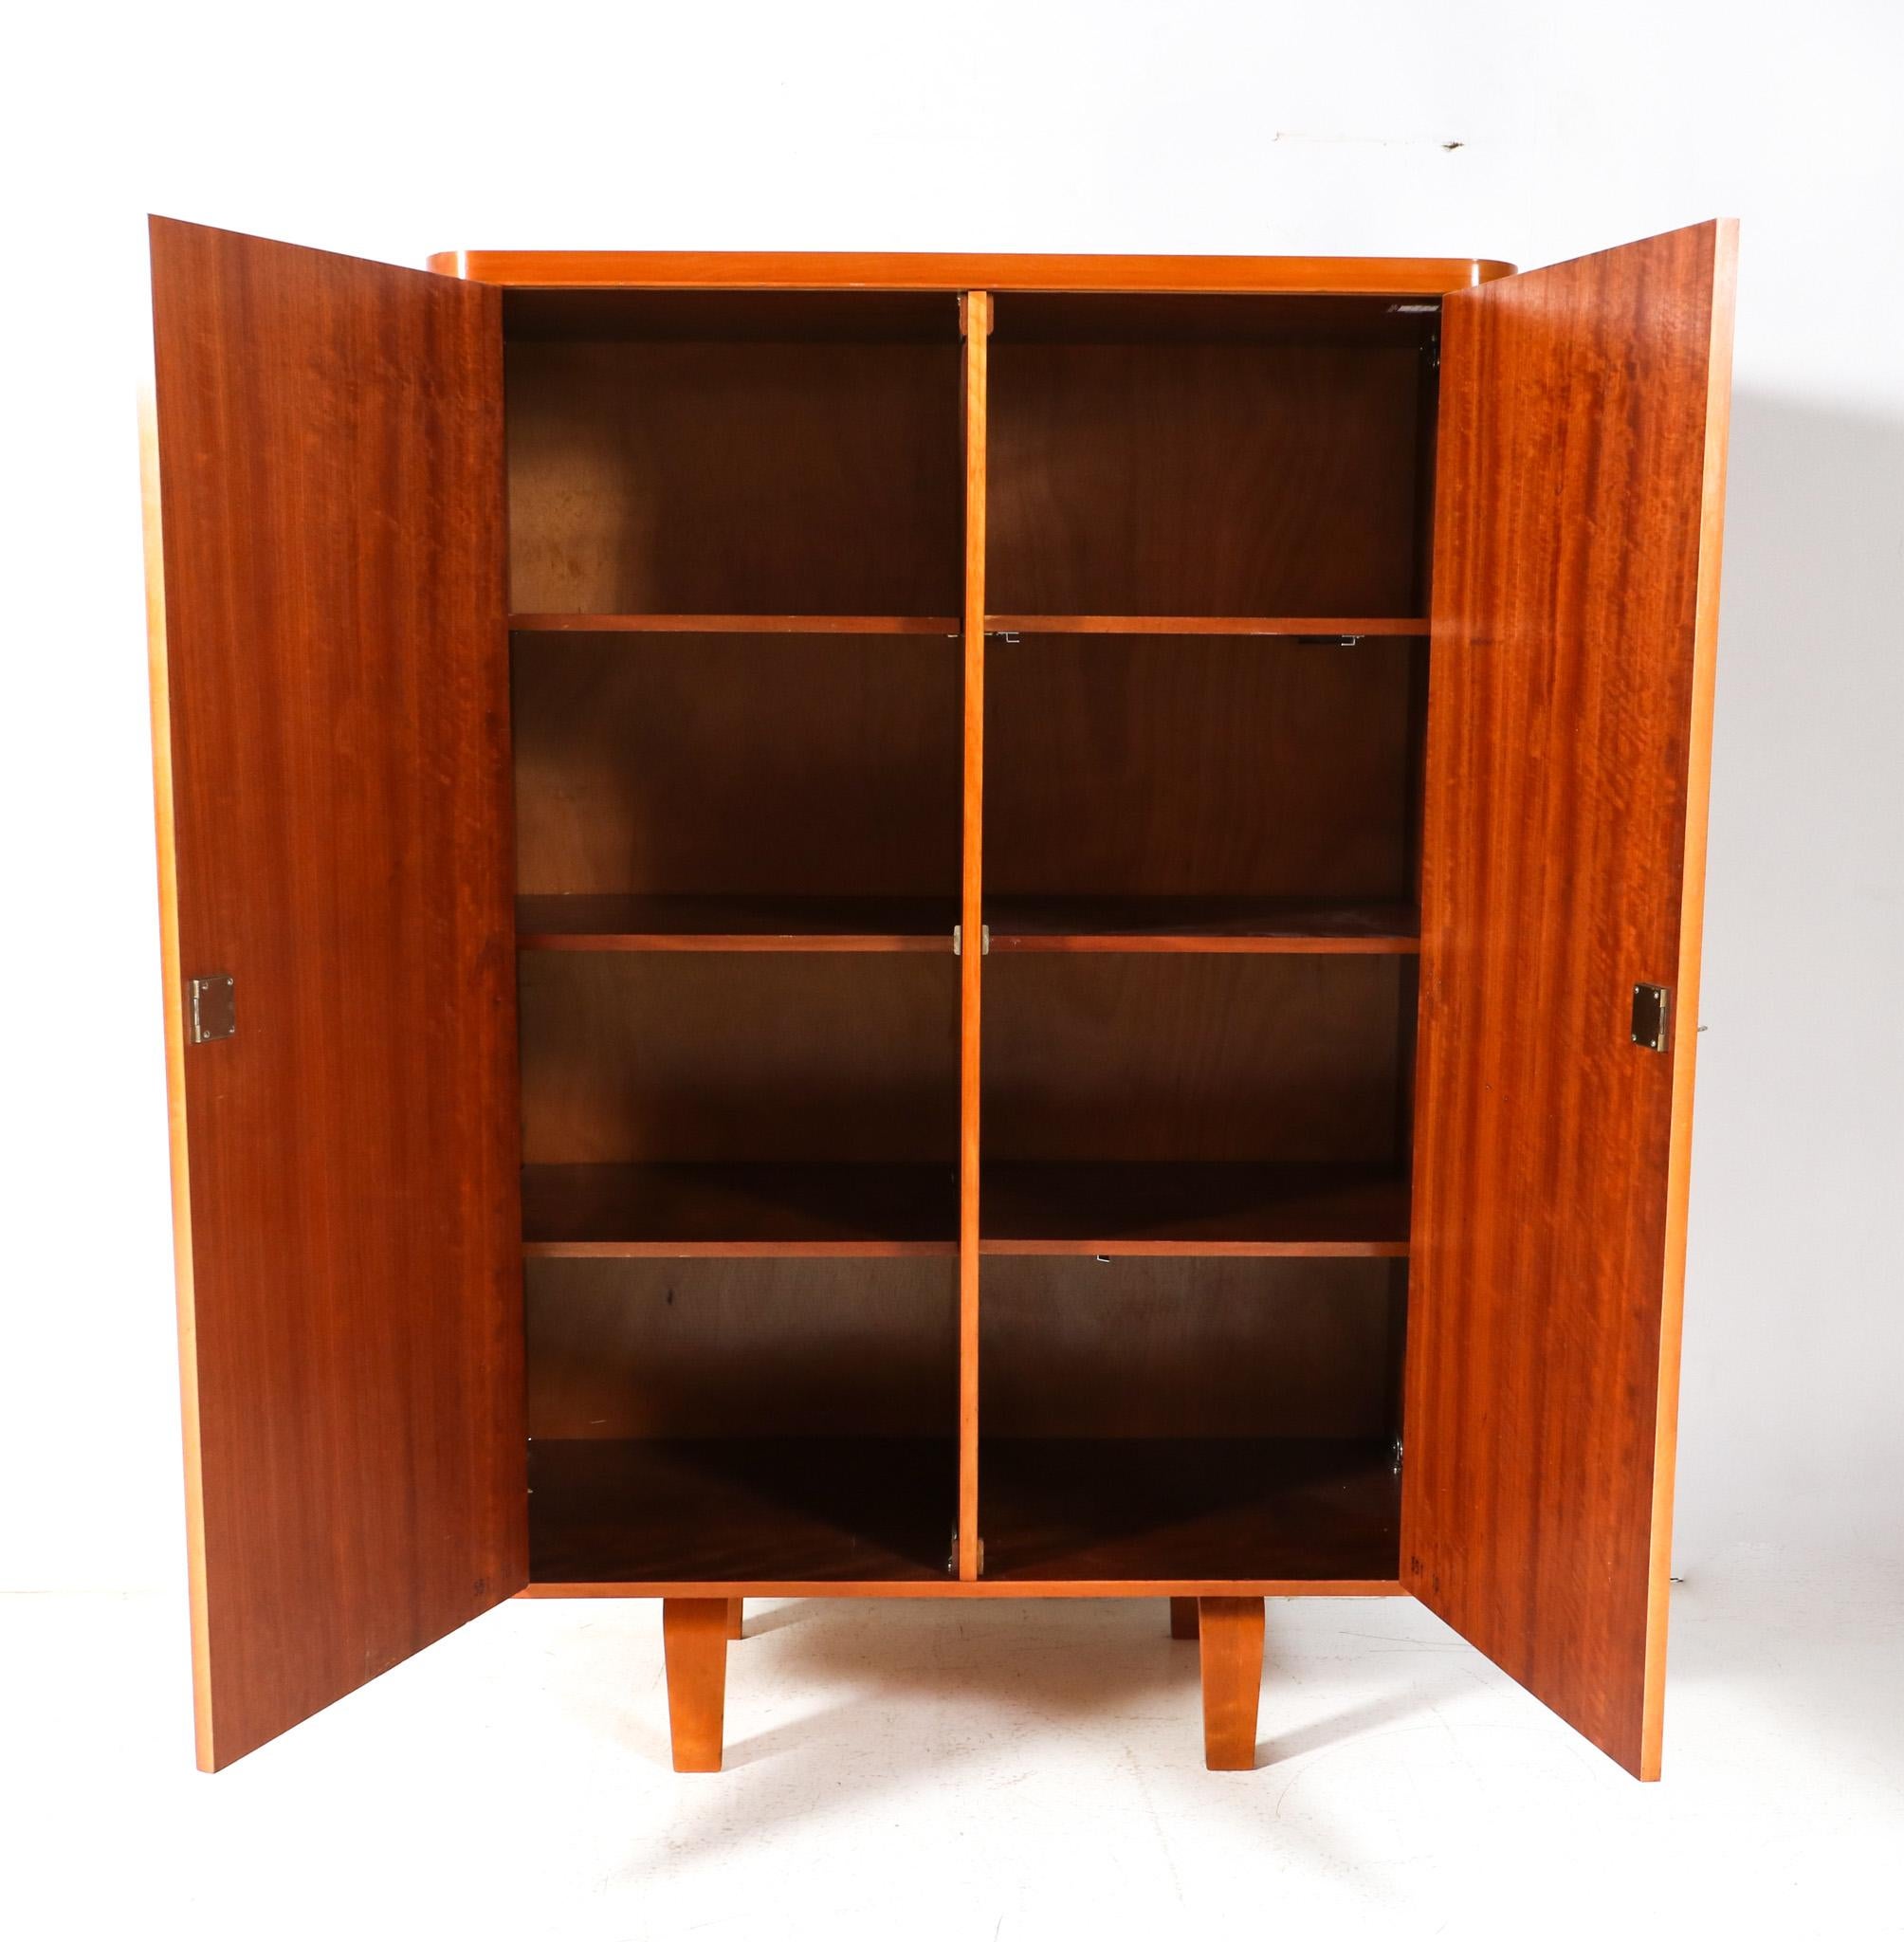 Dutch Birch Plywood Mid-Century Modern Armoire by Cor Alons for Den Boer Gouda, 1949 For Sale